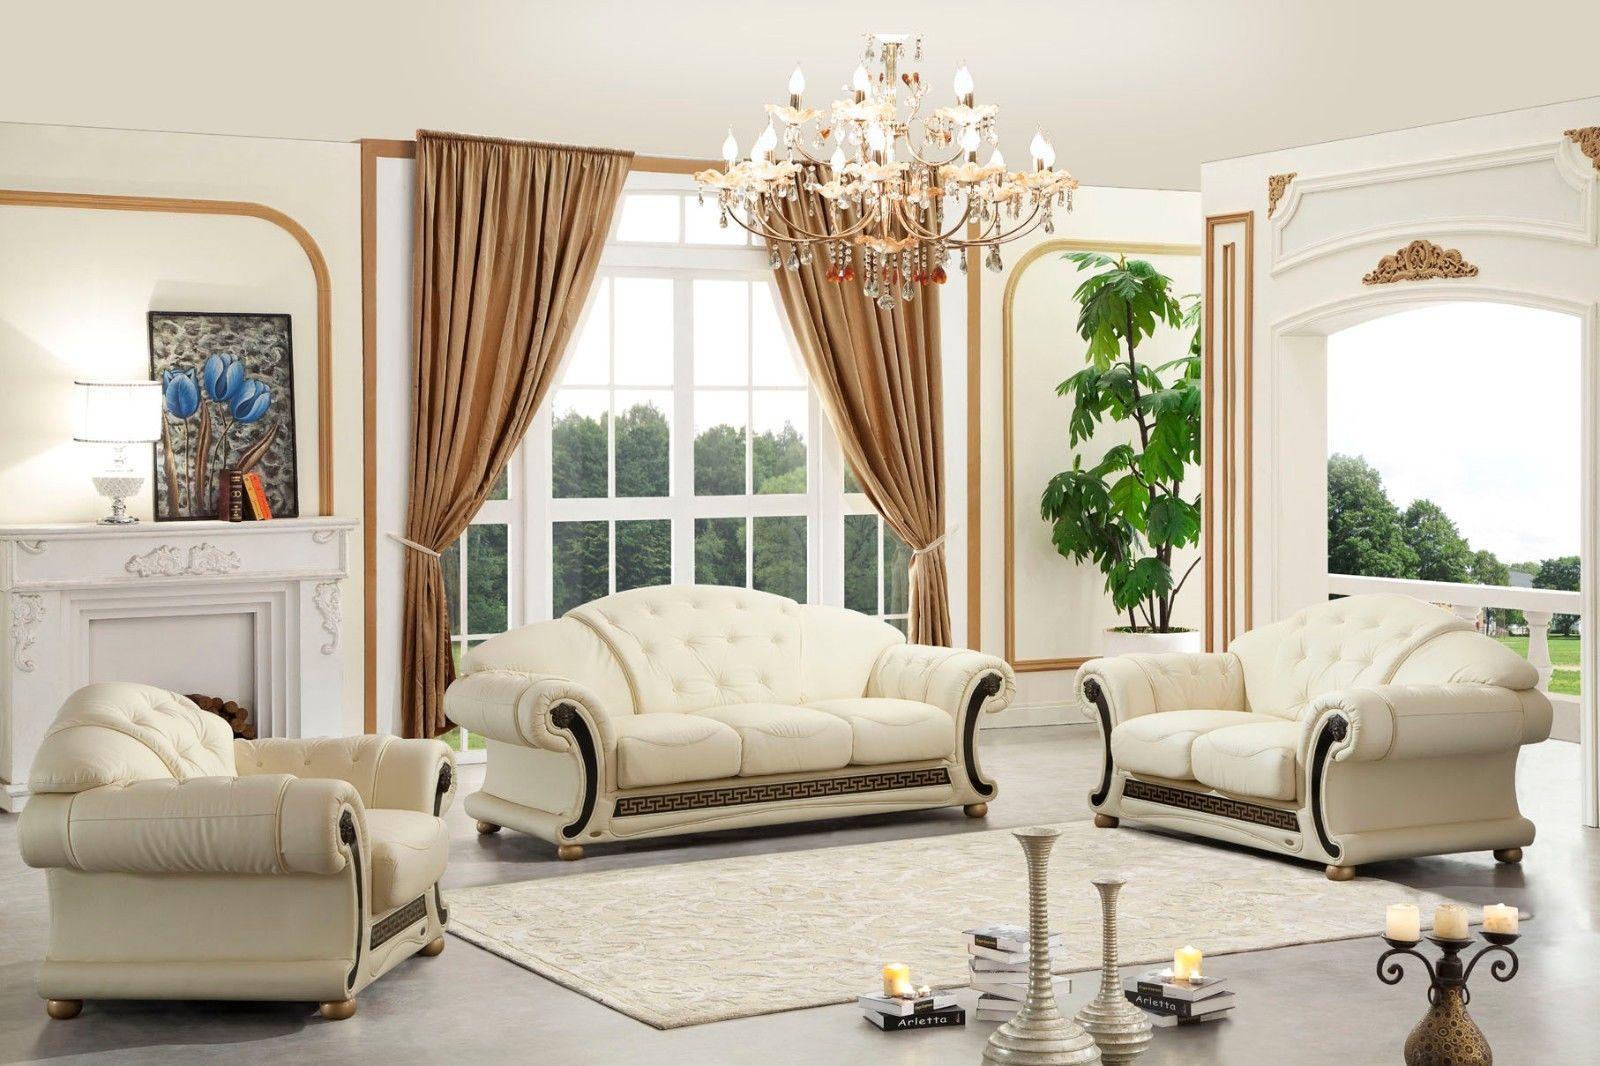 Traditional, Transitional Sofa Set V.Cleopatra APOLO-Beige-3-set in Beige Leather